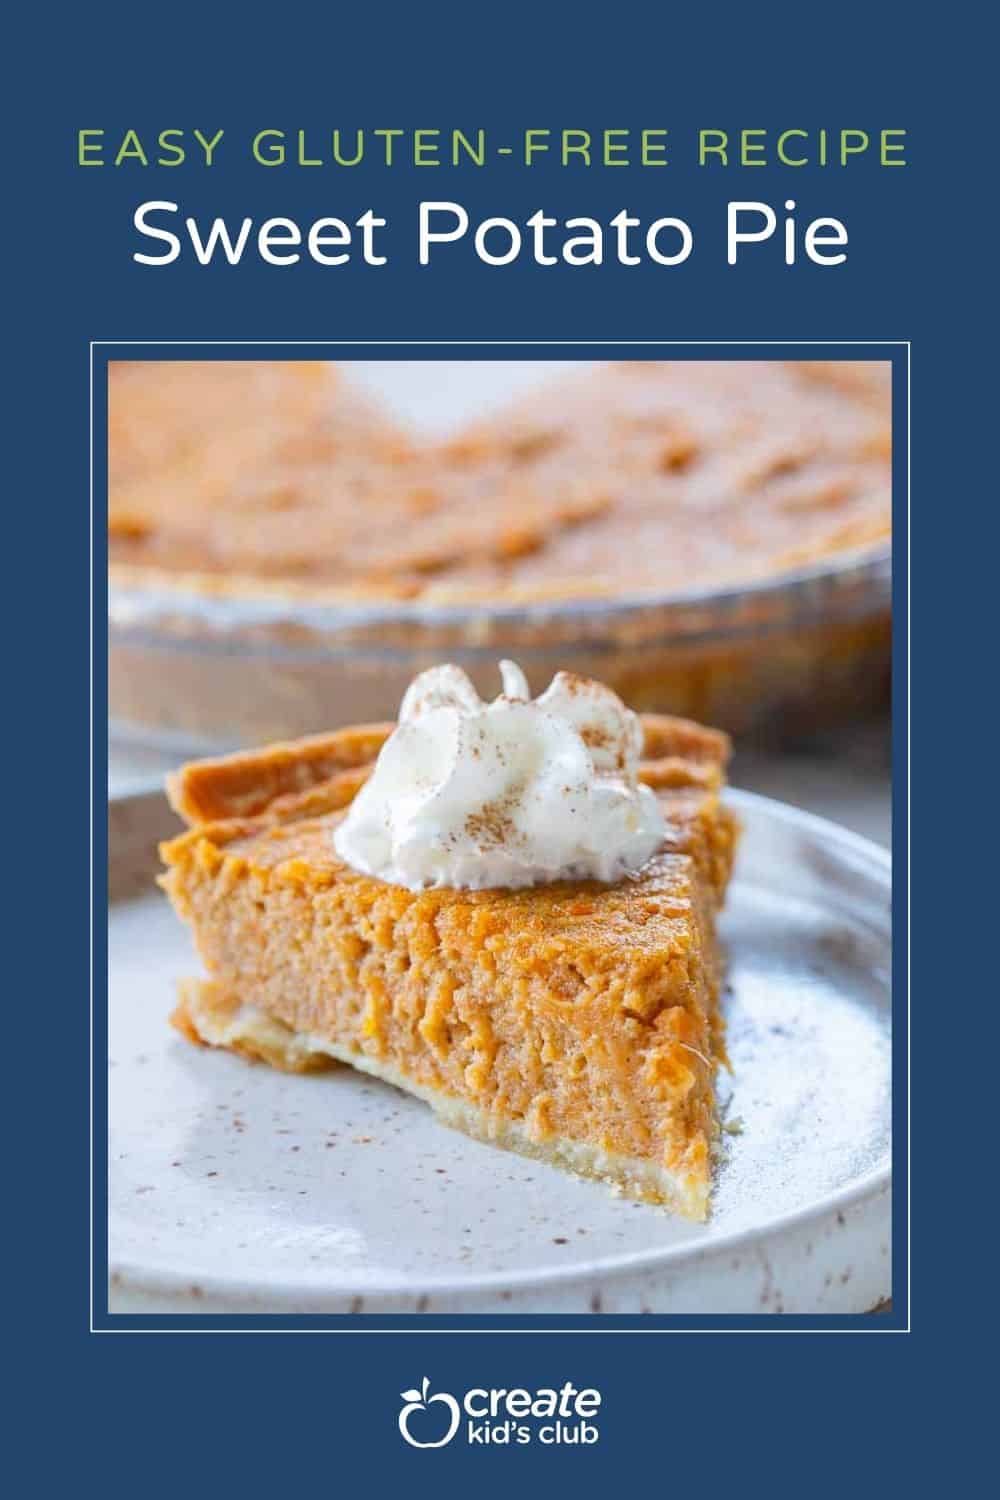 Pin of old fashioned sweet potato pie.